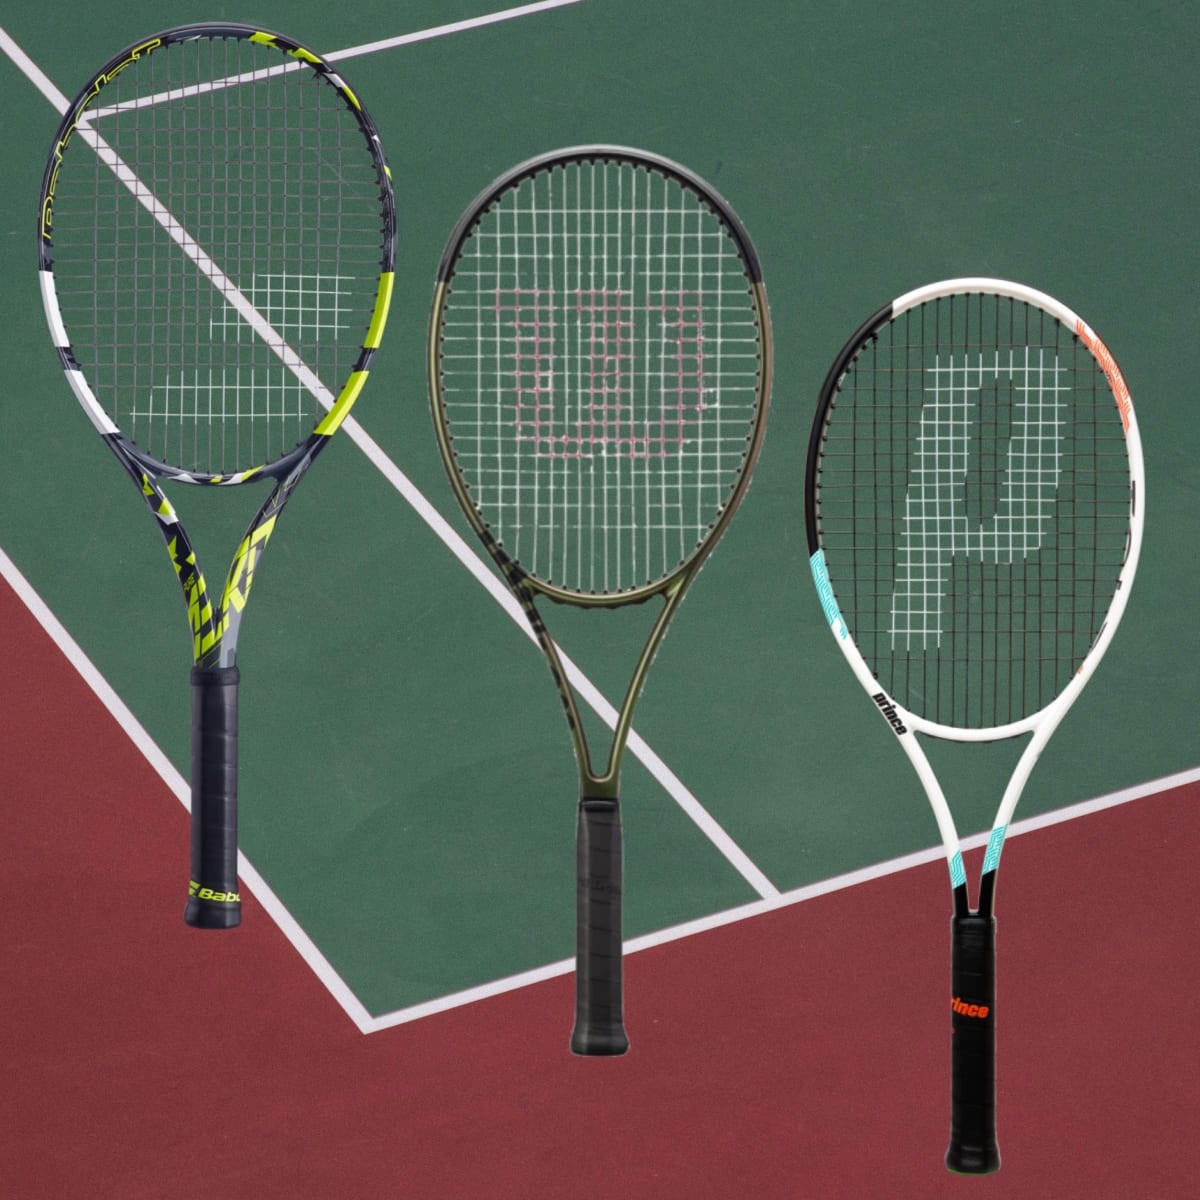 Racket Grips: A Small but Significant Part of the Badminton Game!